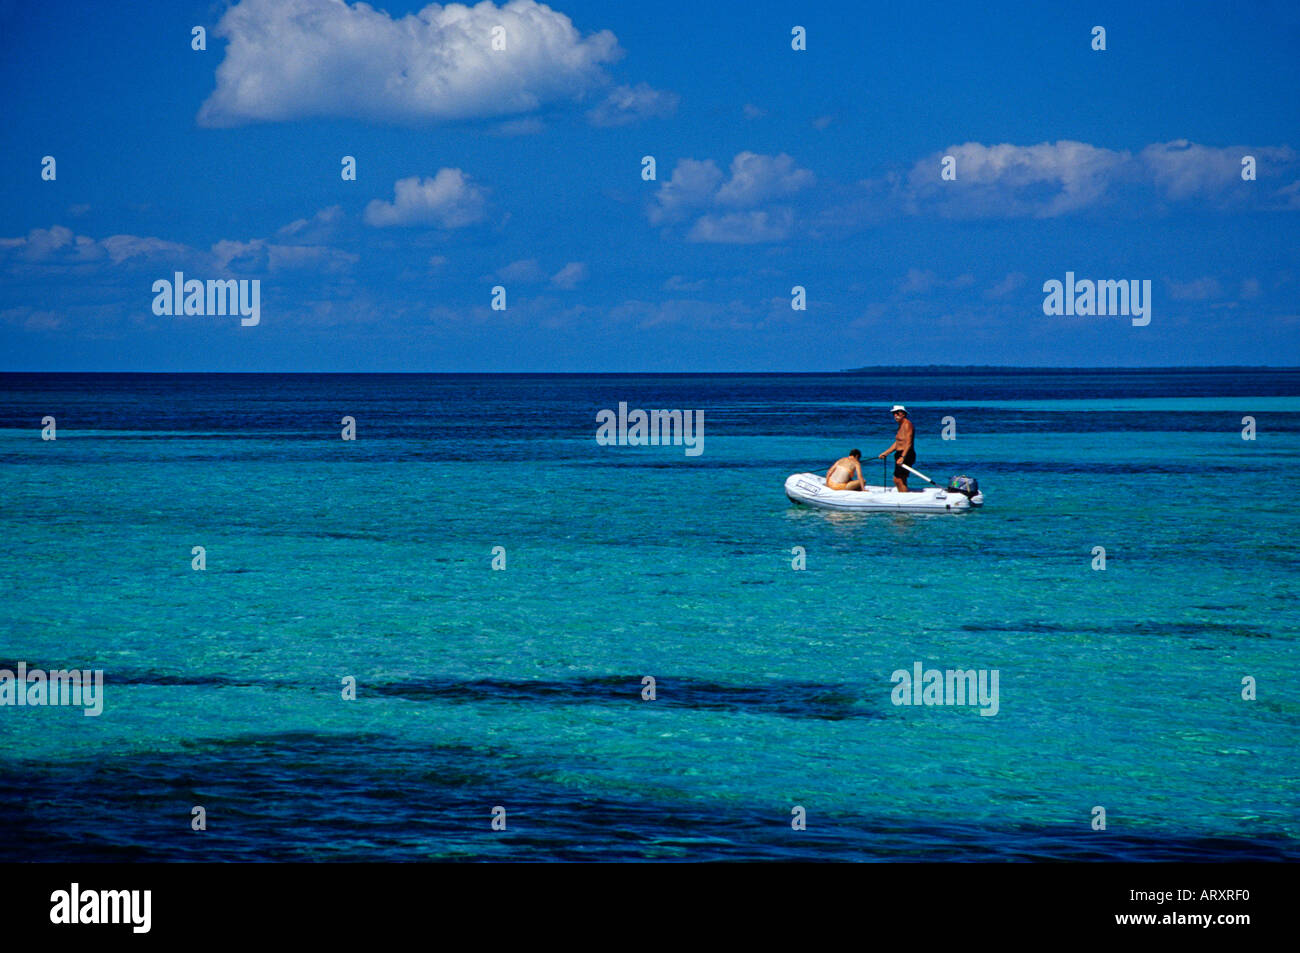 Retirees on small boat in Caribbean ocean Stock Photo